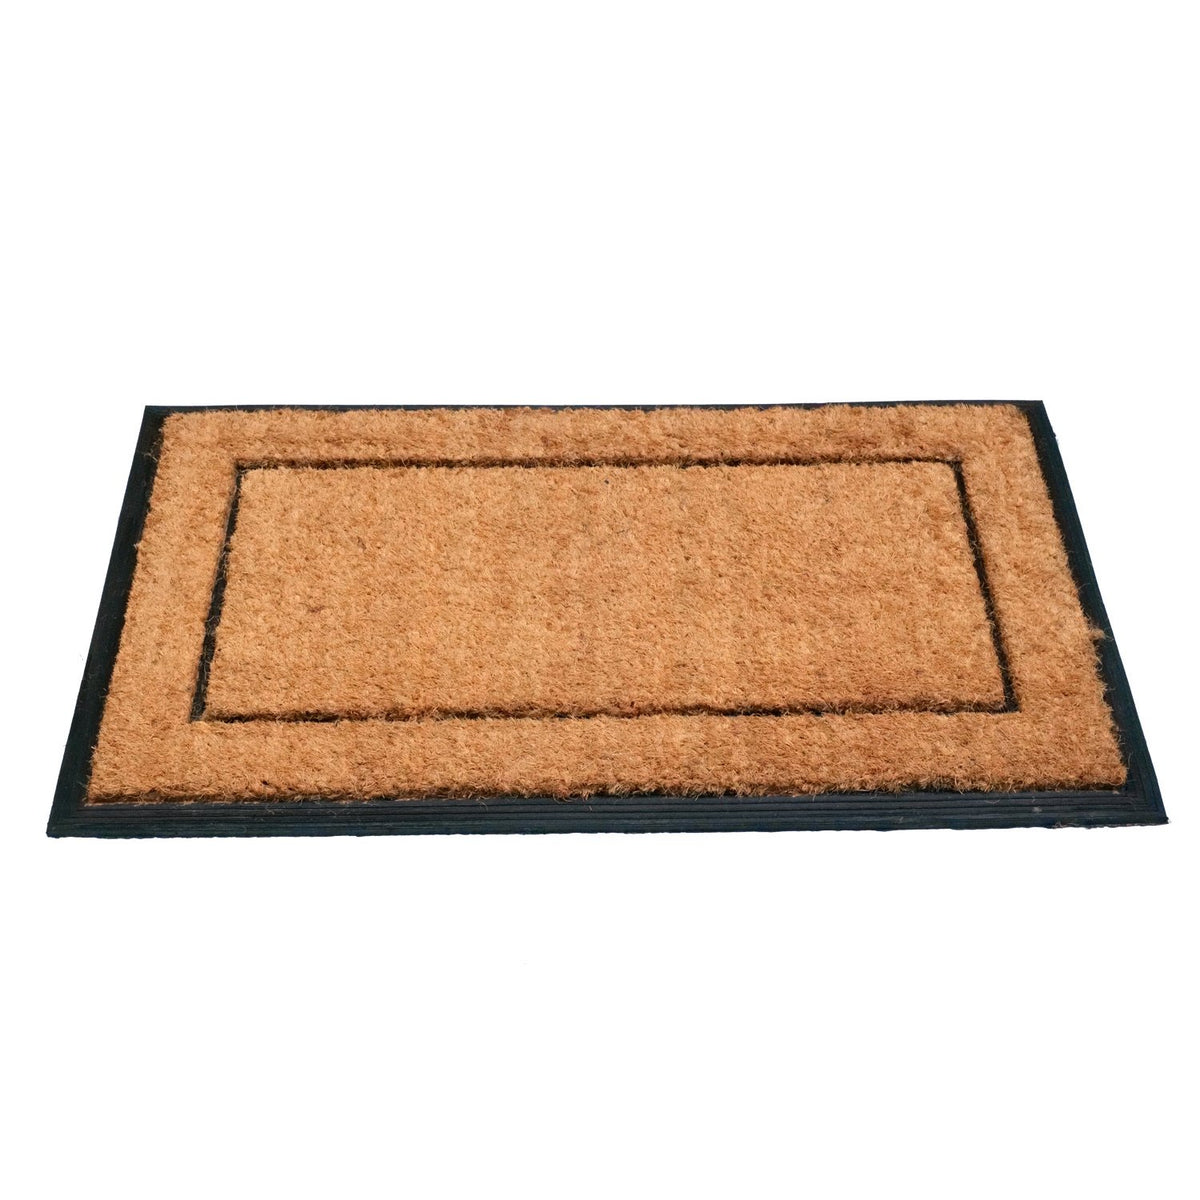 Plain Natural Coir Doormat with Rubber Moulded Border and Backing Mat (60cm x 90cm x 2 cm)